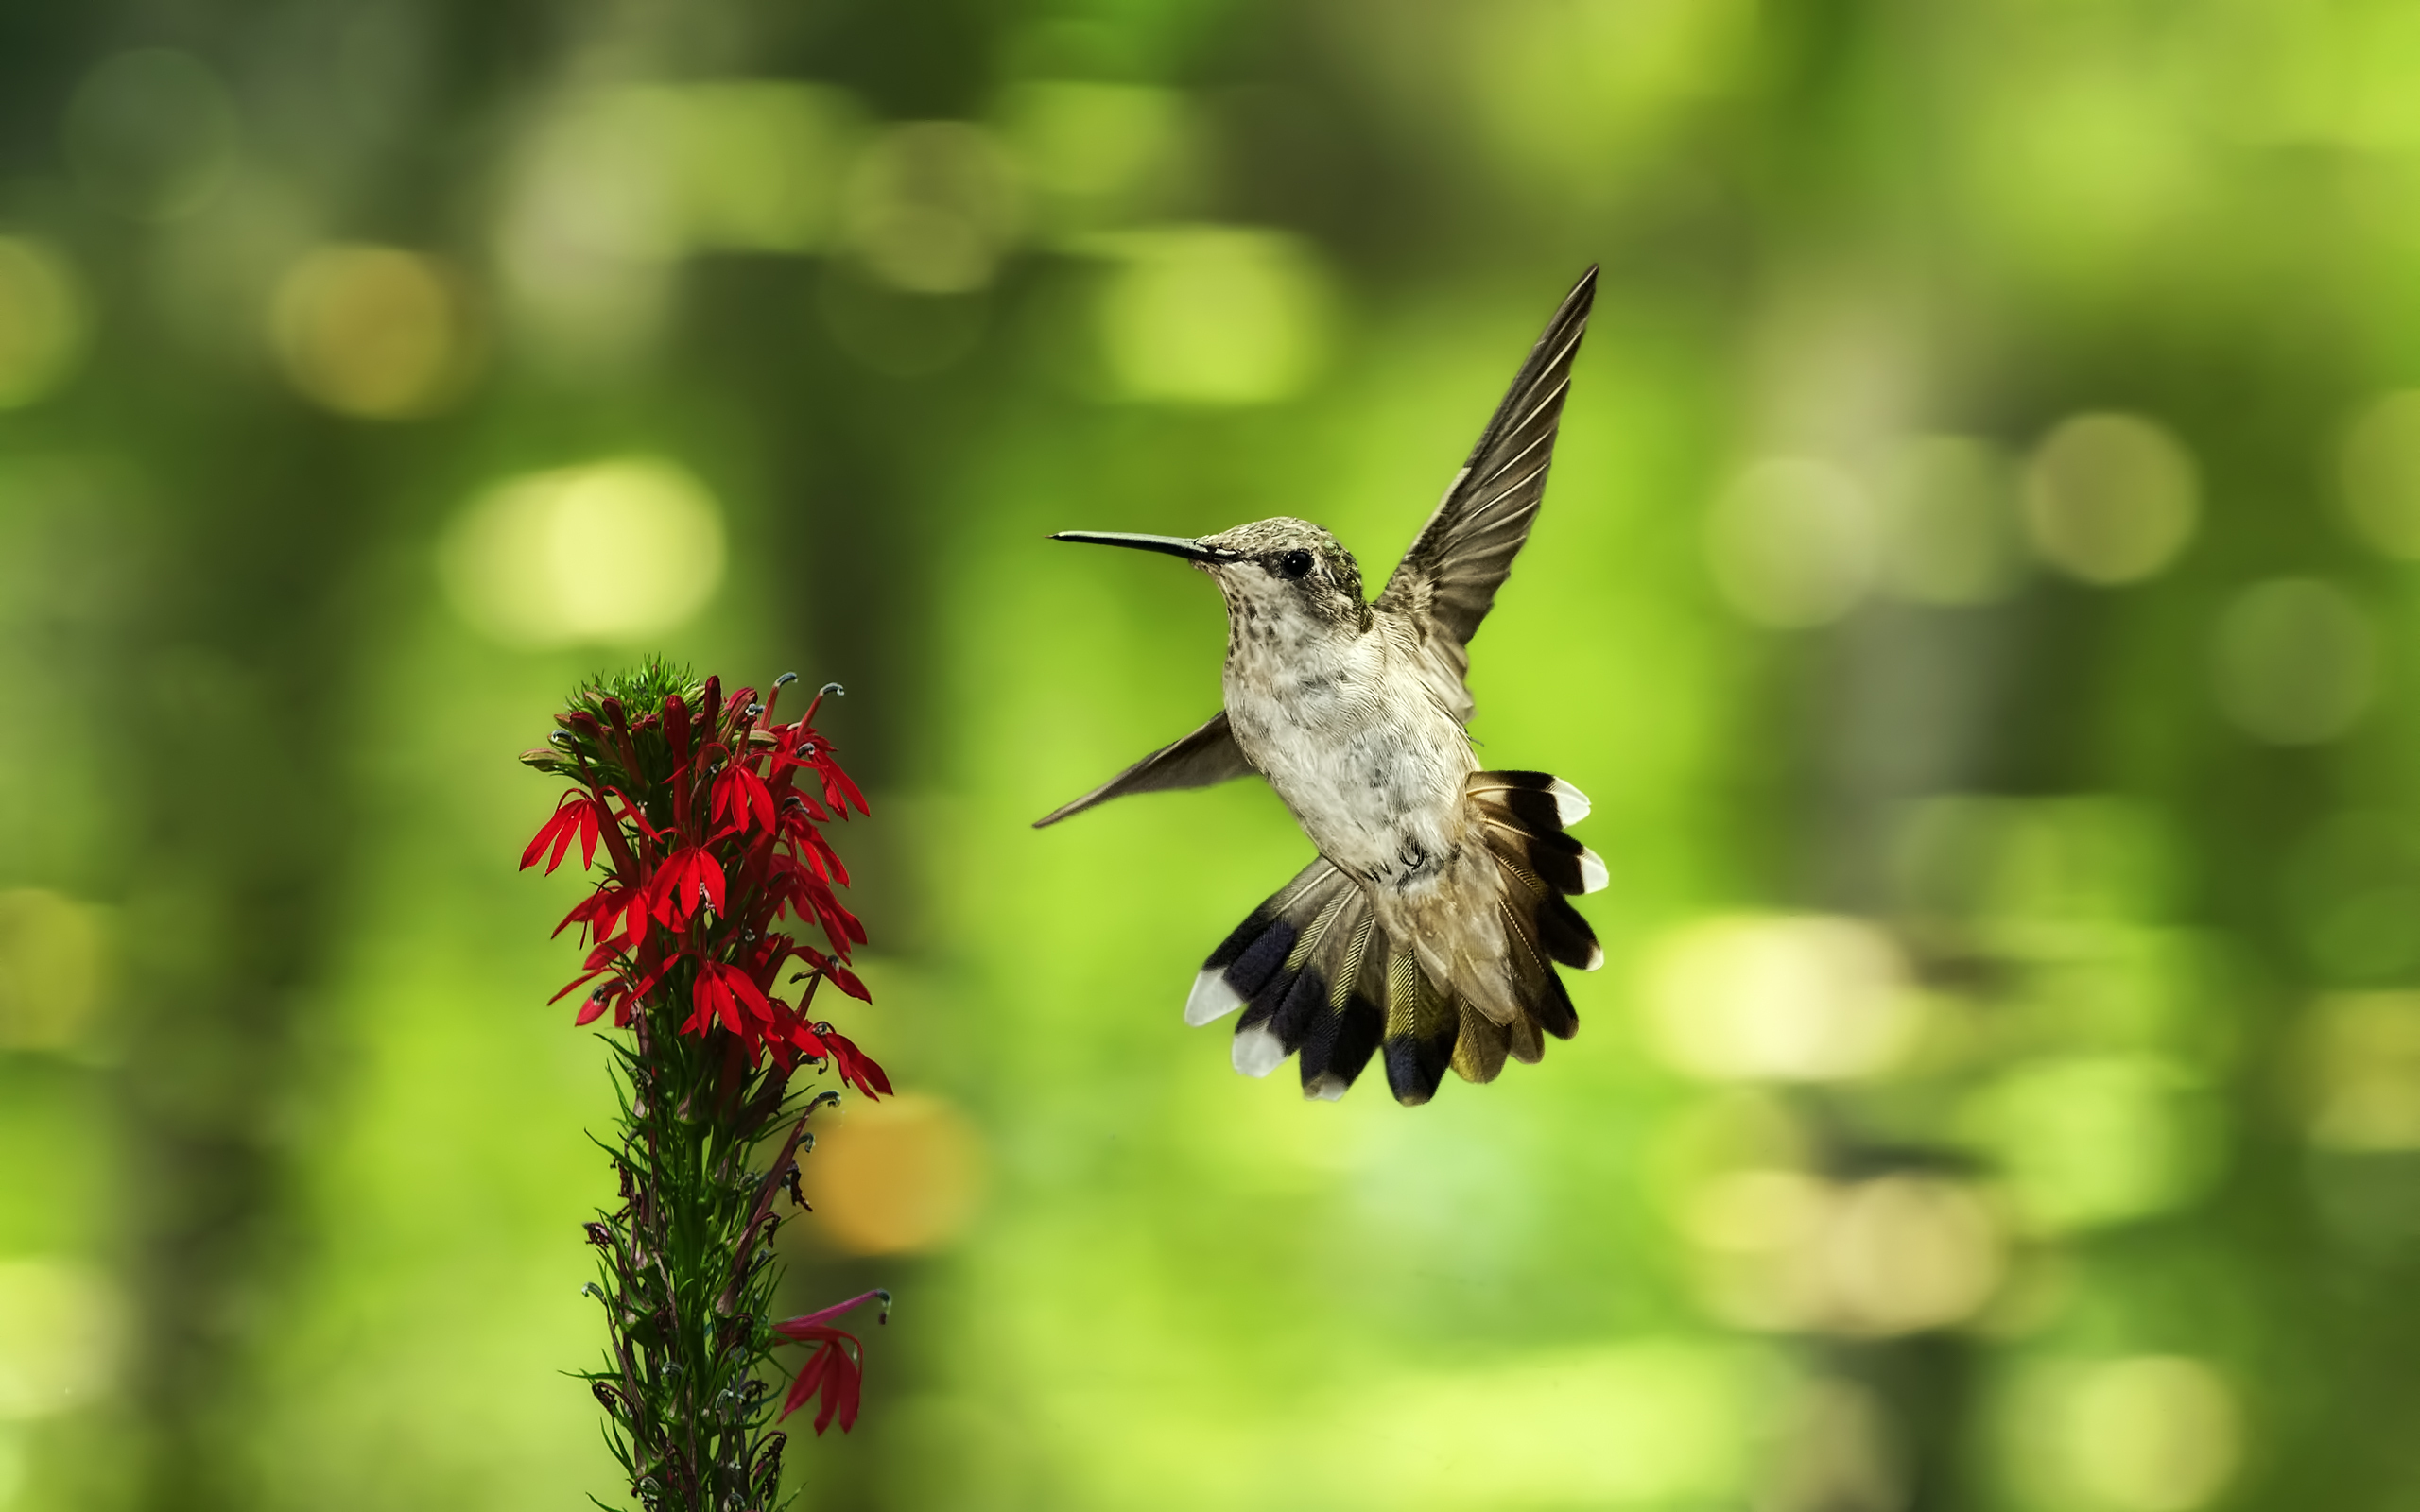 Hummingbird old mobile cell phone smartphone wallpapers hd desktop  backgrounds 240x320 downloads images and pictures